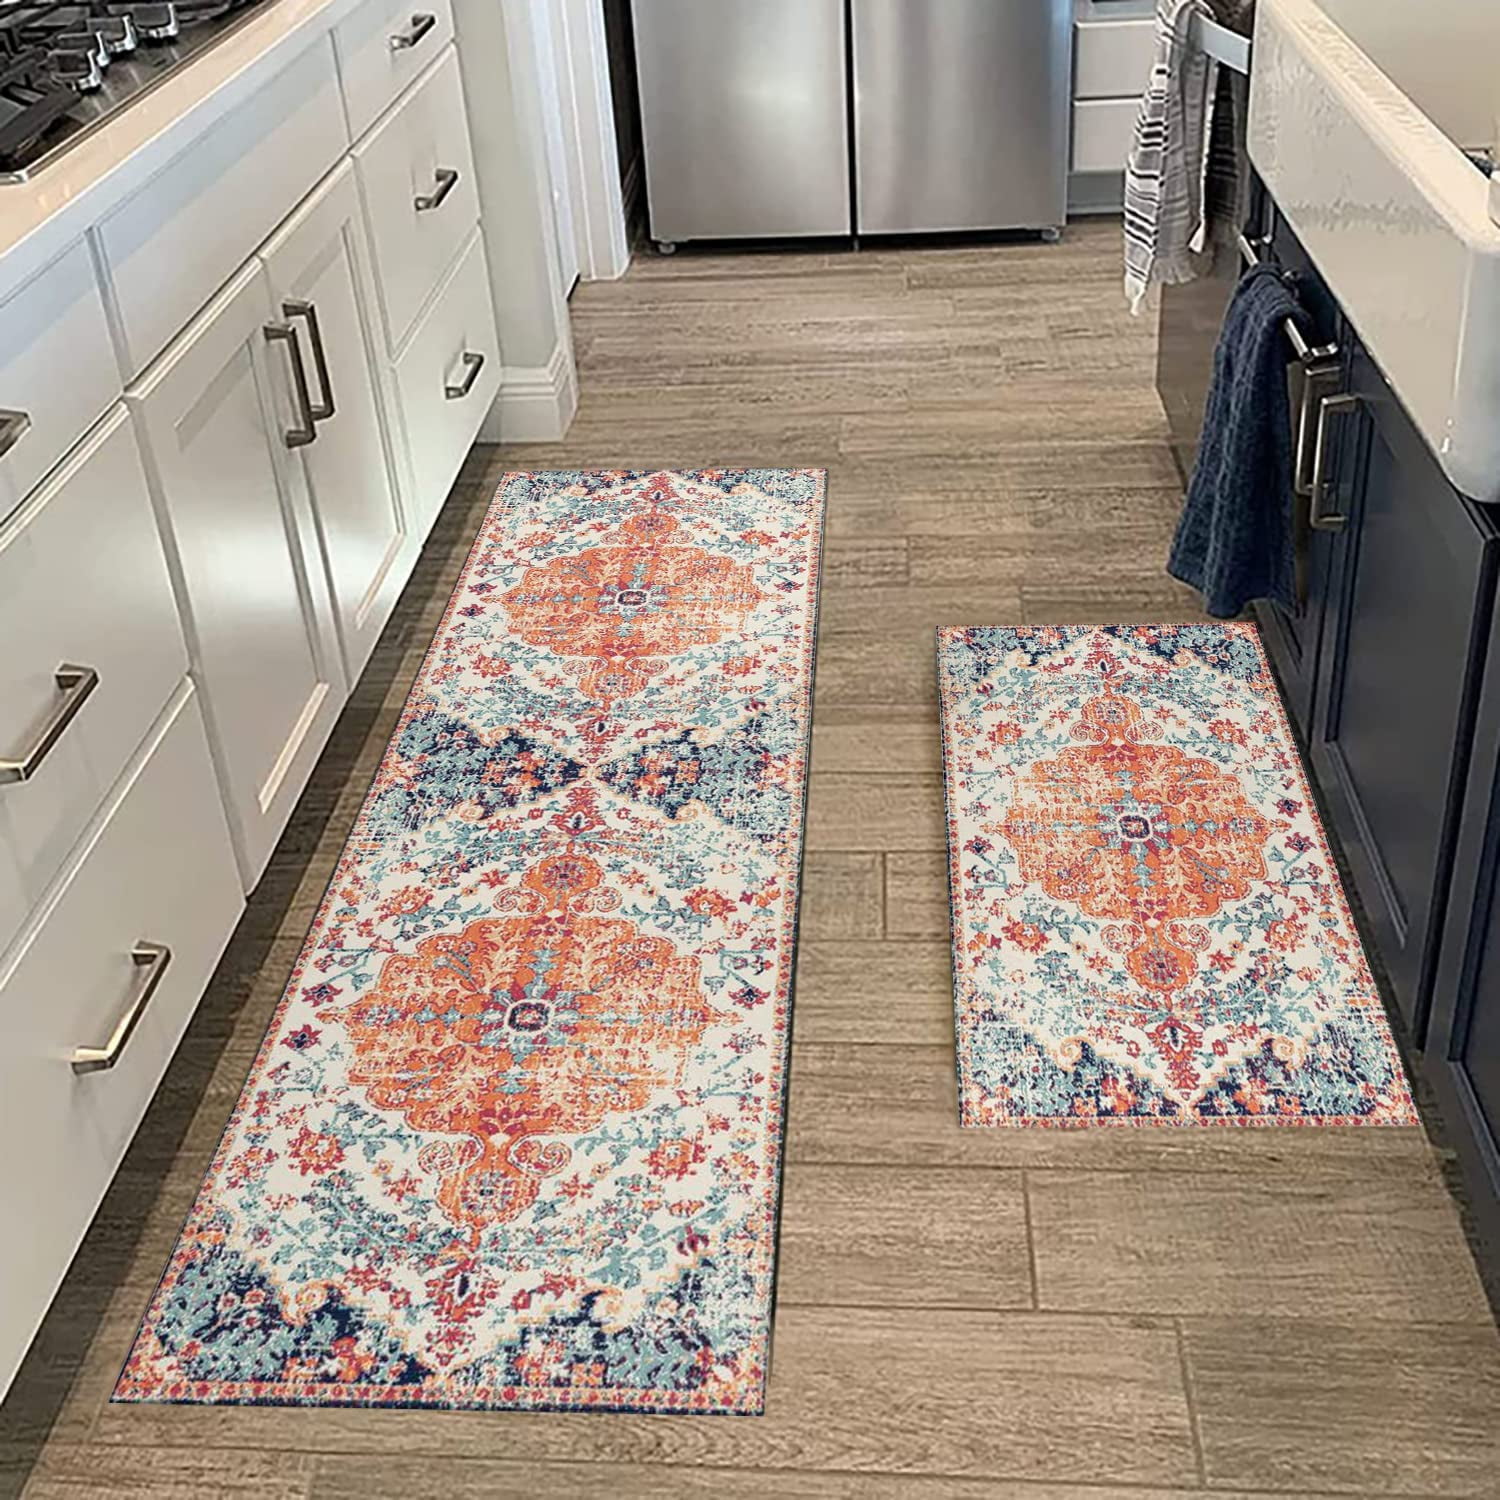 MontVoo Kitchen Rugs and Mats Washable [2 Pcs] Non-Skid Natural Rubber Kitchen Mats for Floor Runner Rugs Set for Kitchen Floor Front of Sink, Hallway